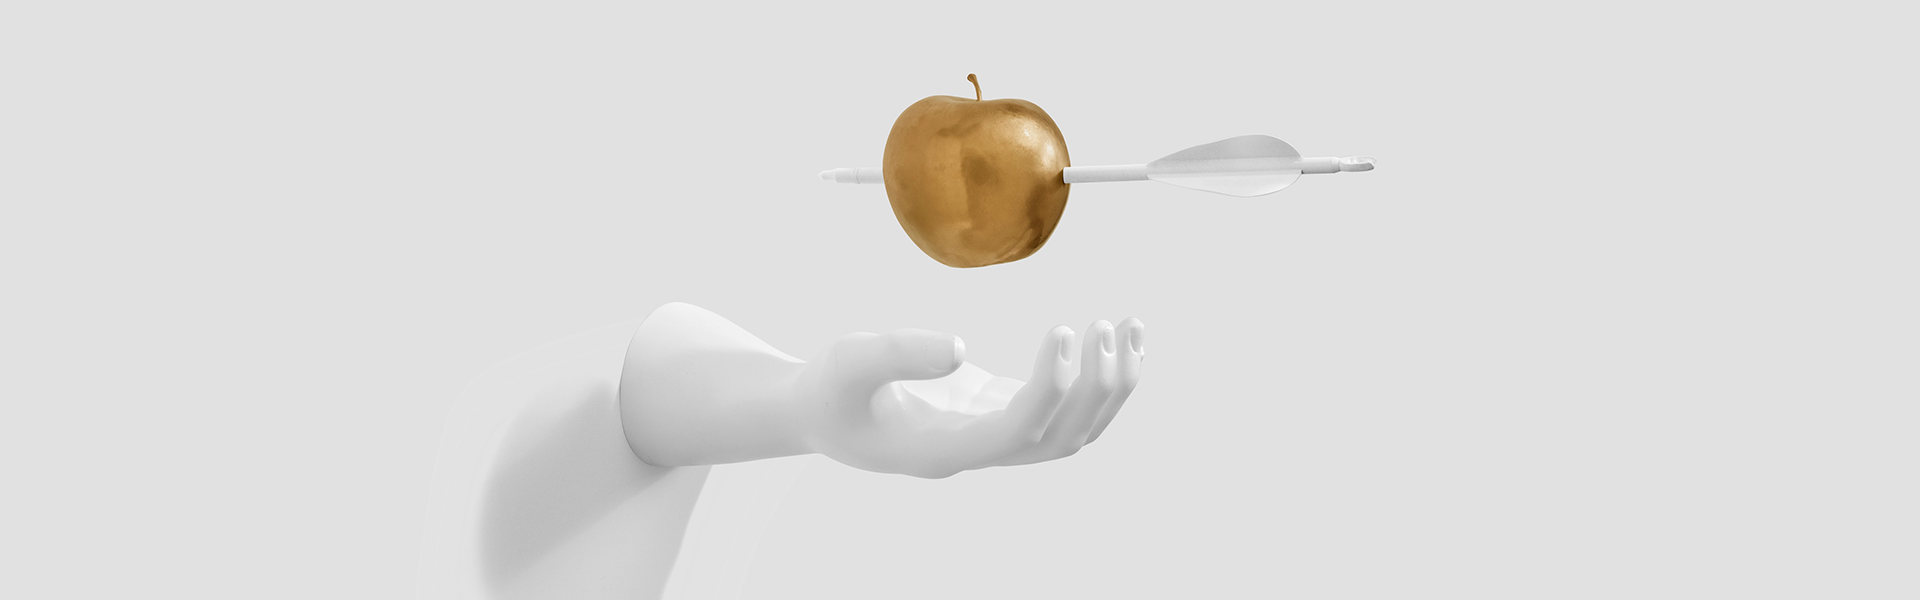 Hand coming out of wall with apple pierced by arrow above